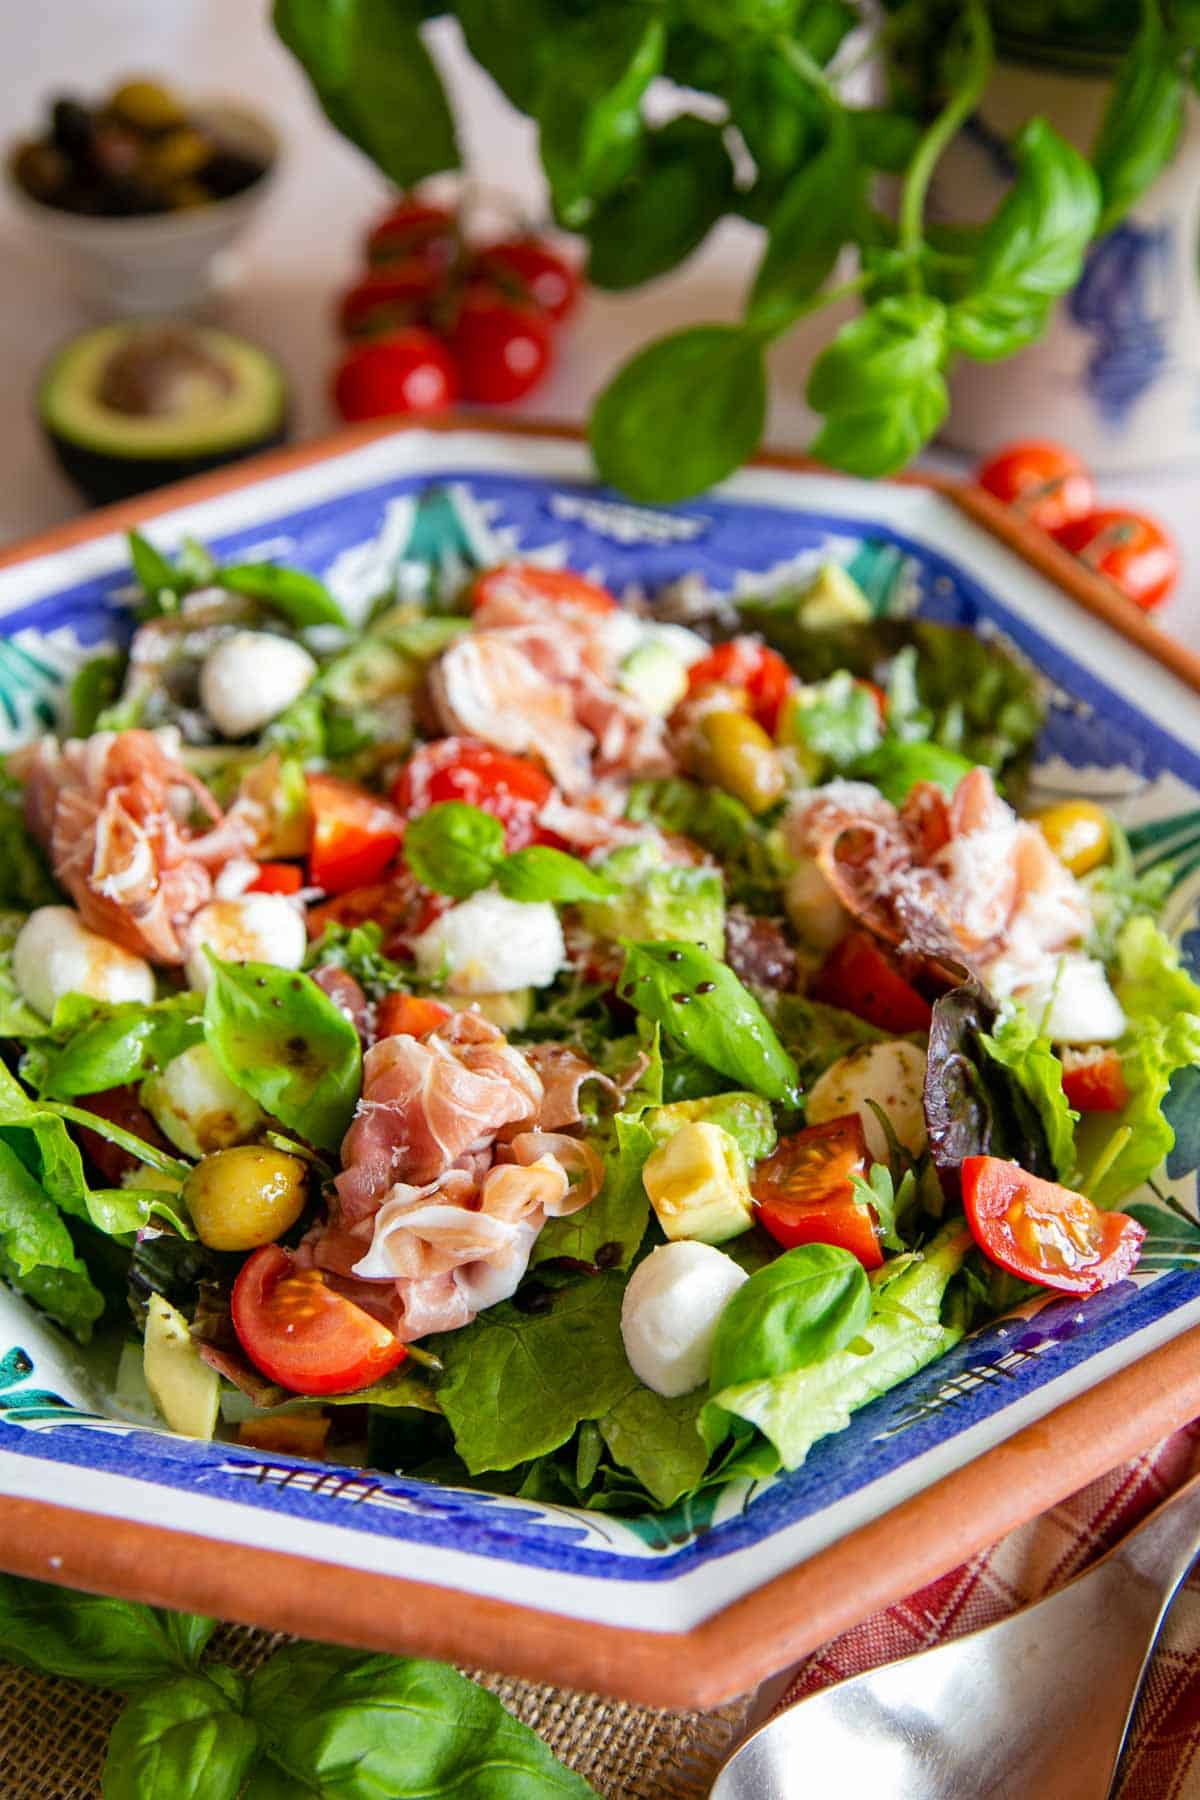 A delicious Italian style green salad, topped with fabulous antipasti, ready to serve.